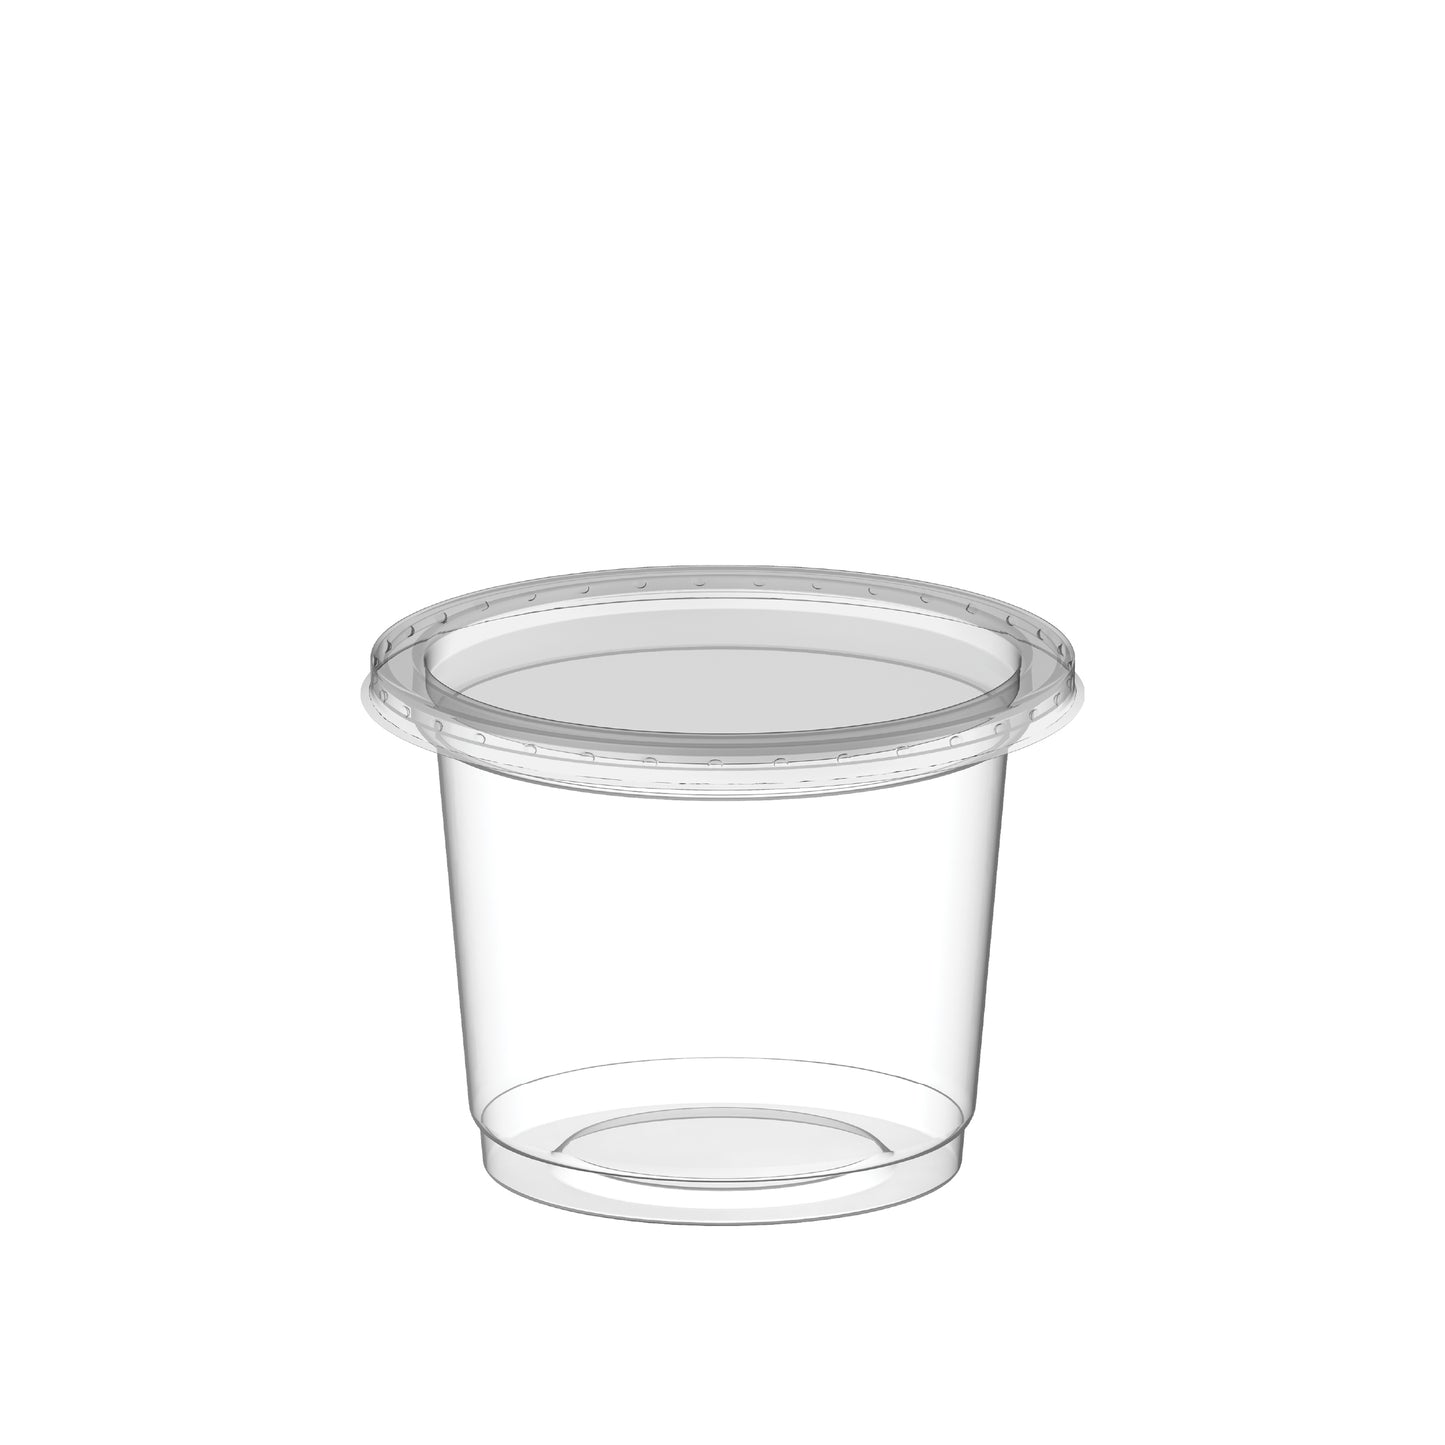 Wholesale 1 oz White Sauce Cups with White Lid-Cosmoplast KSA